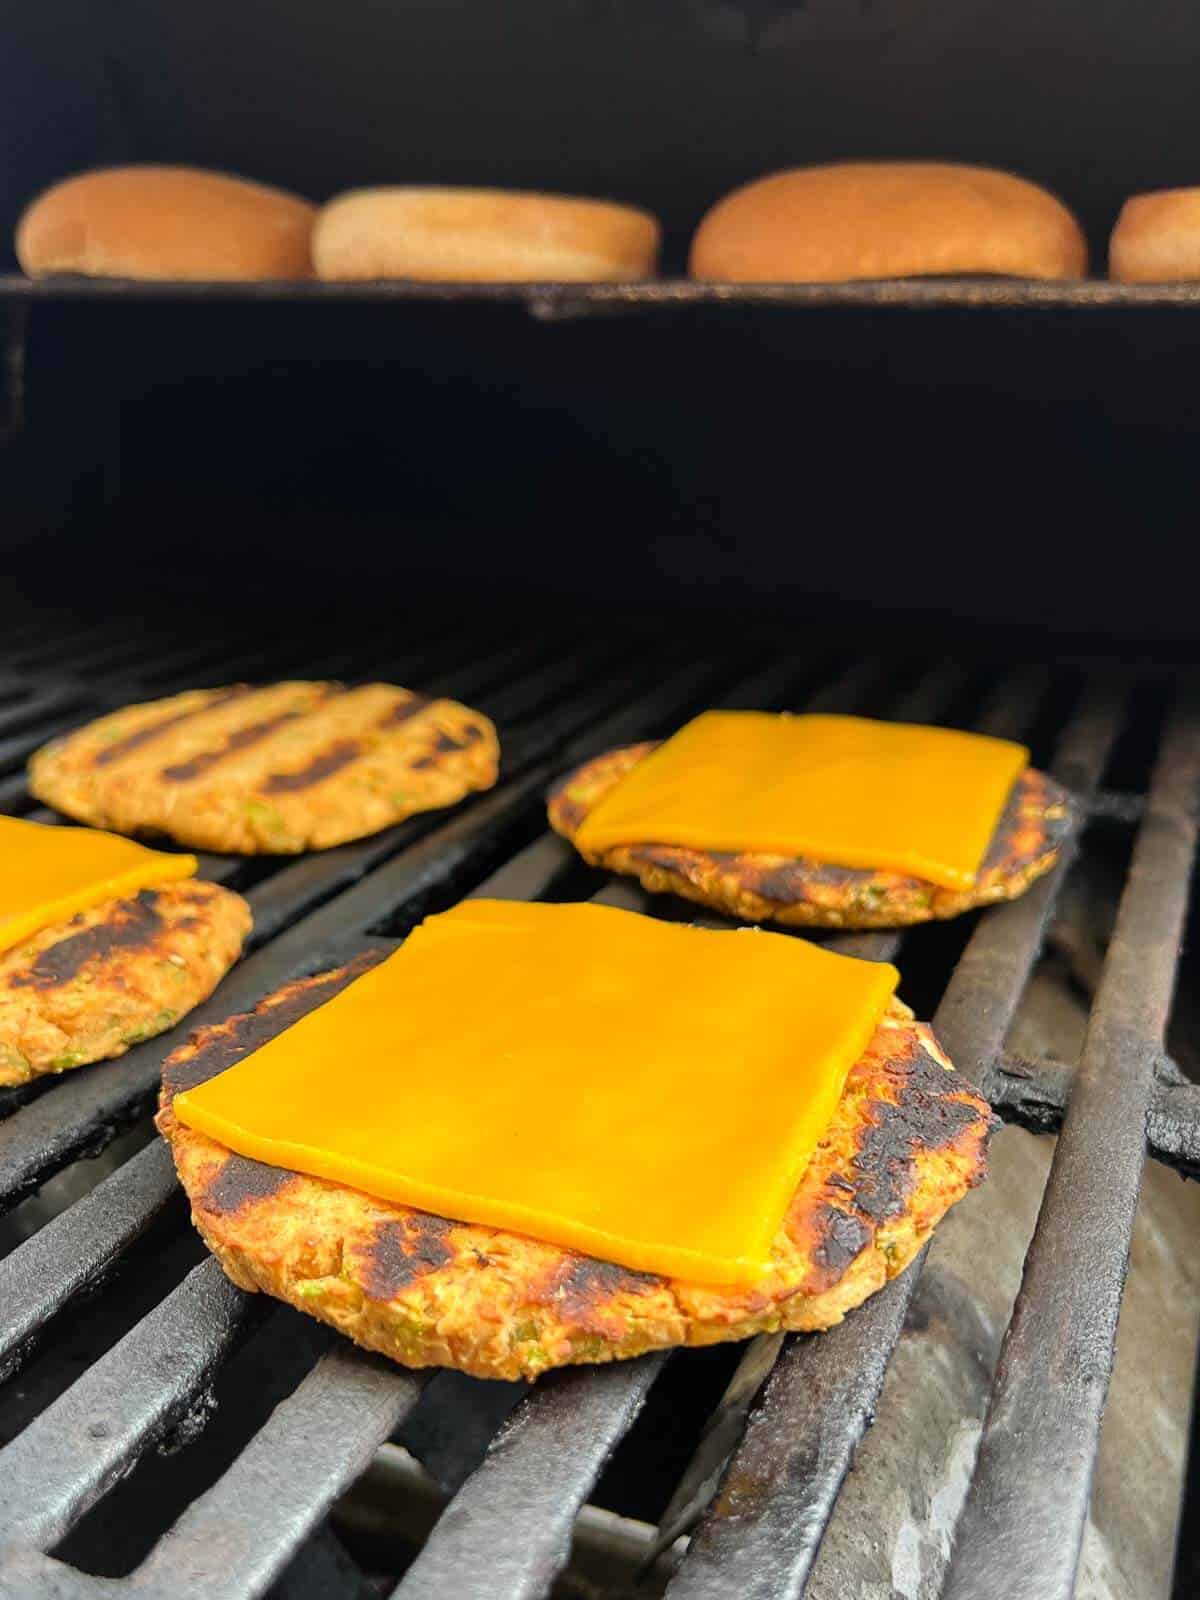 vegan chickpea burgers in the grill with vegan cheddar cheese slices on melting on top